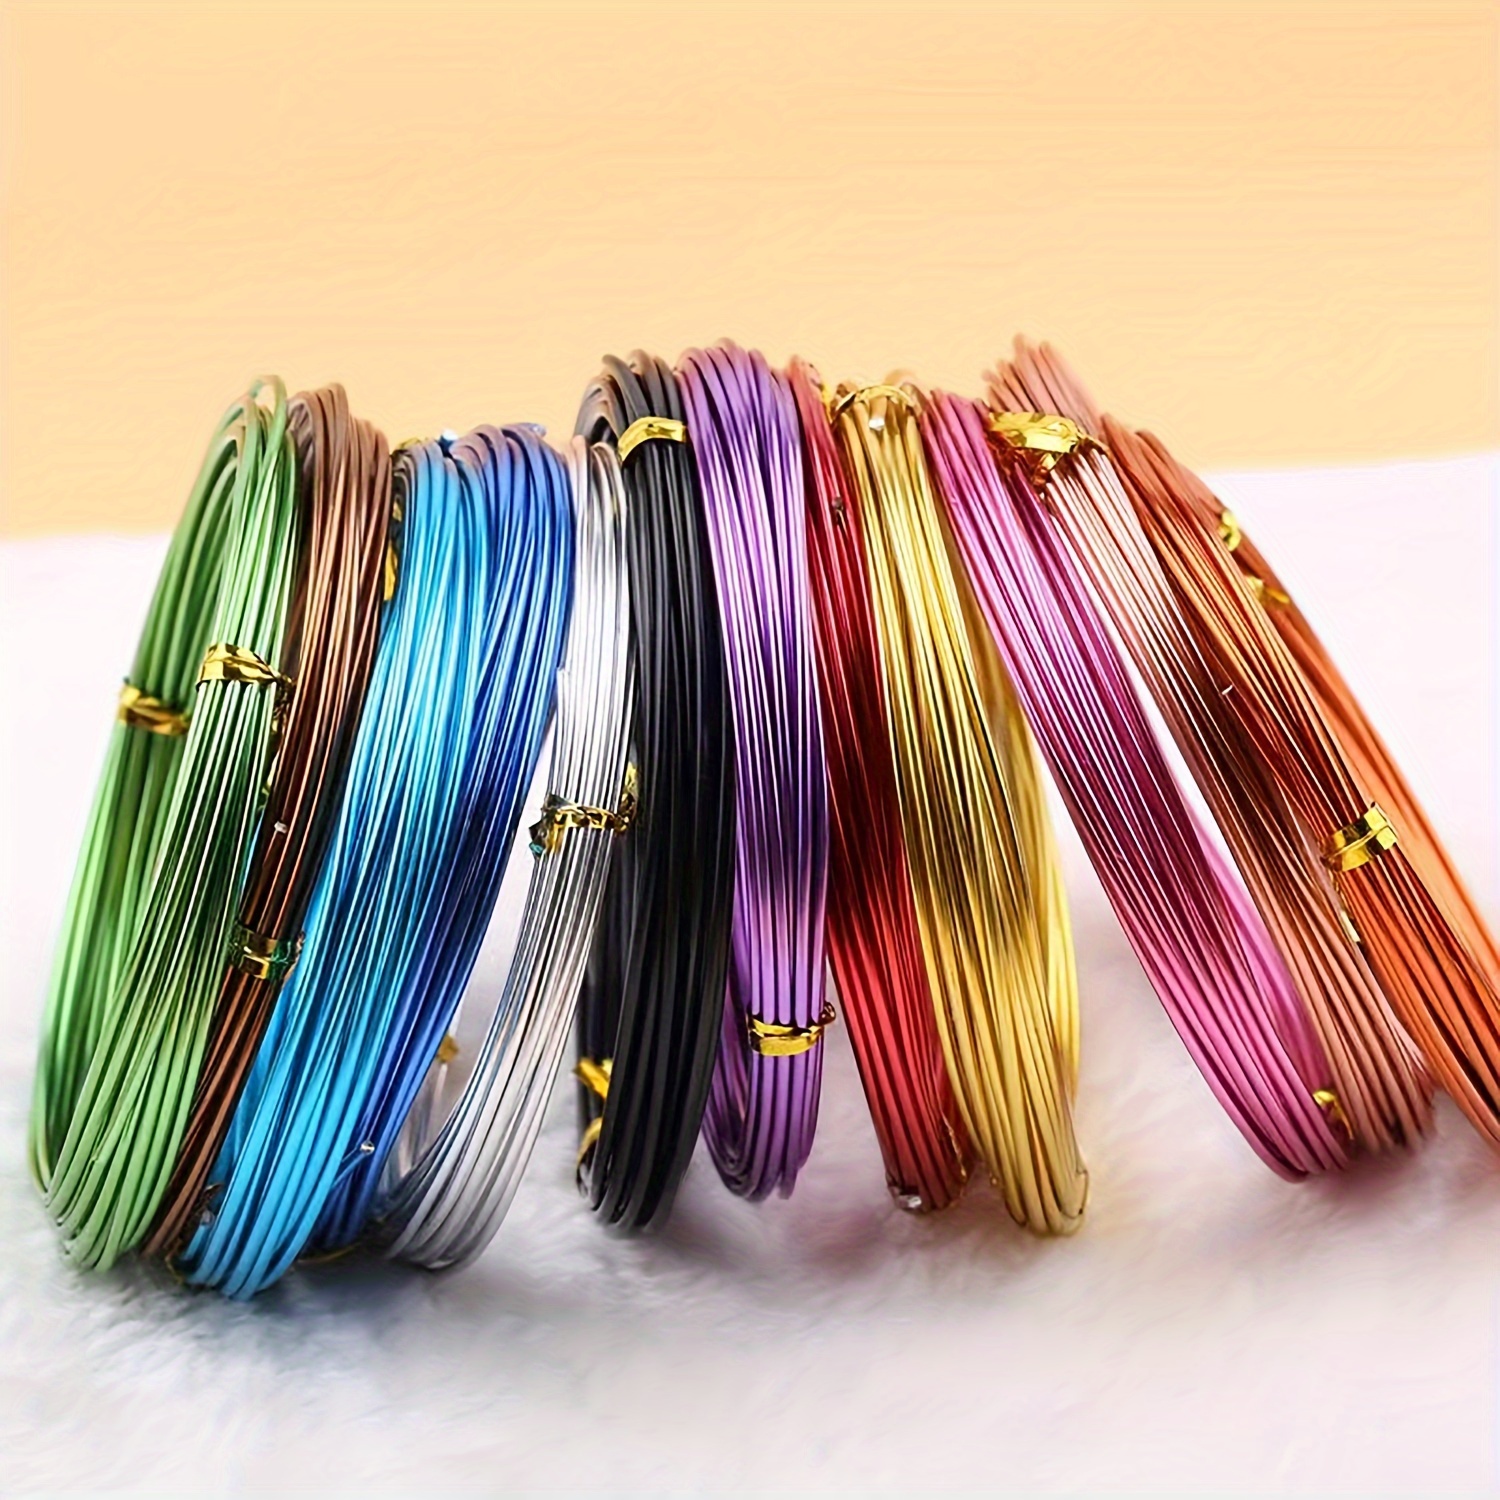 328ft Bendable Aluminum Craft Wire 20 Gauge Jewelry Wire for Jewelry Making